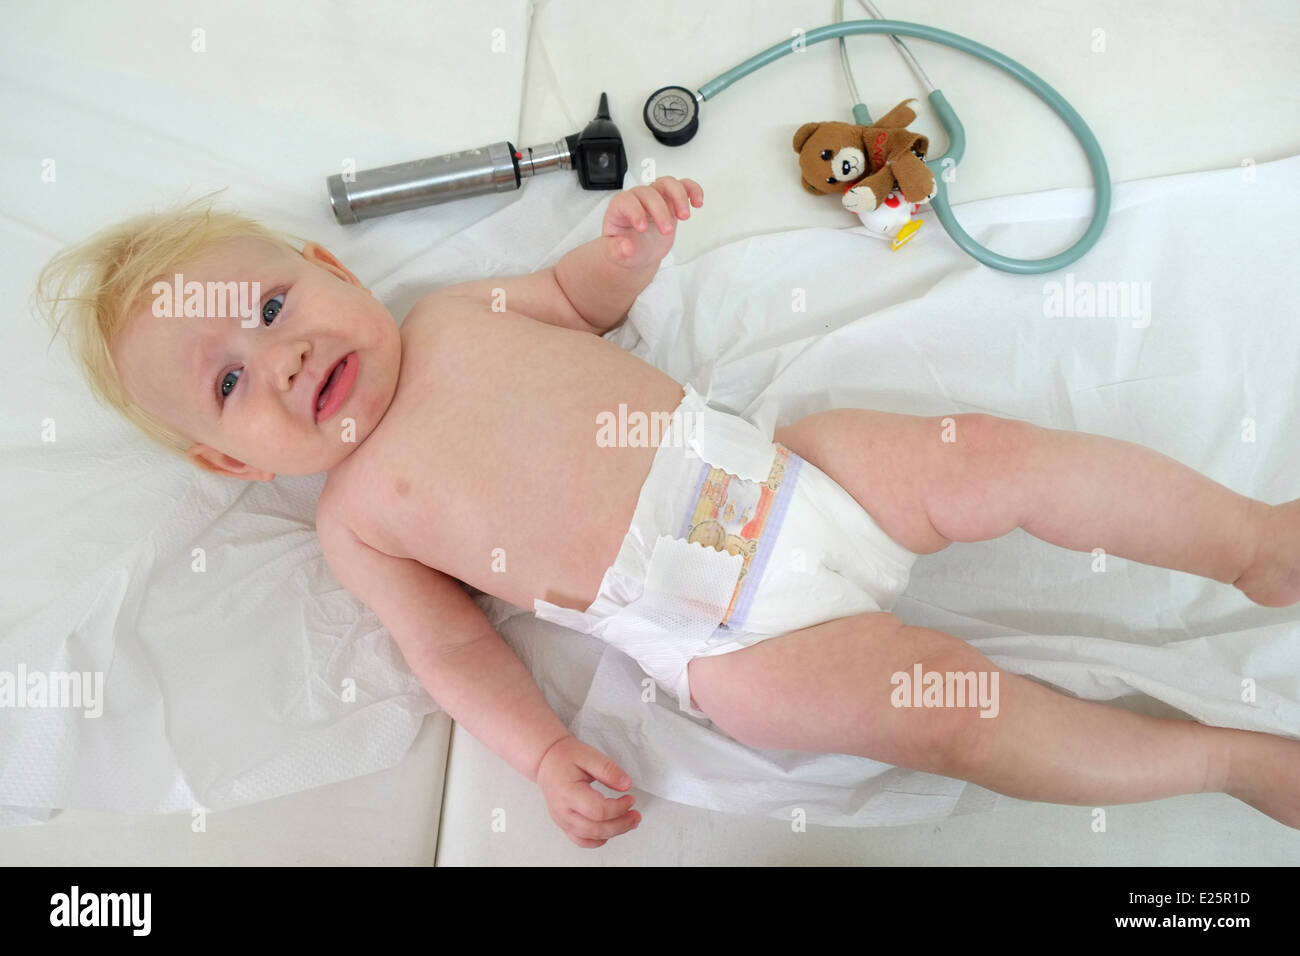 A crying baby at a routine visit at the doctor Stock Photo